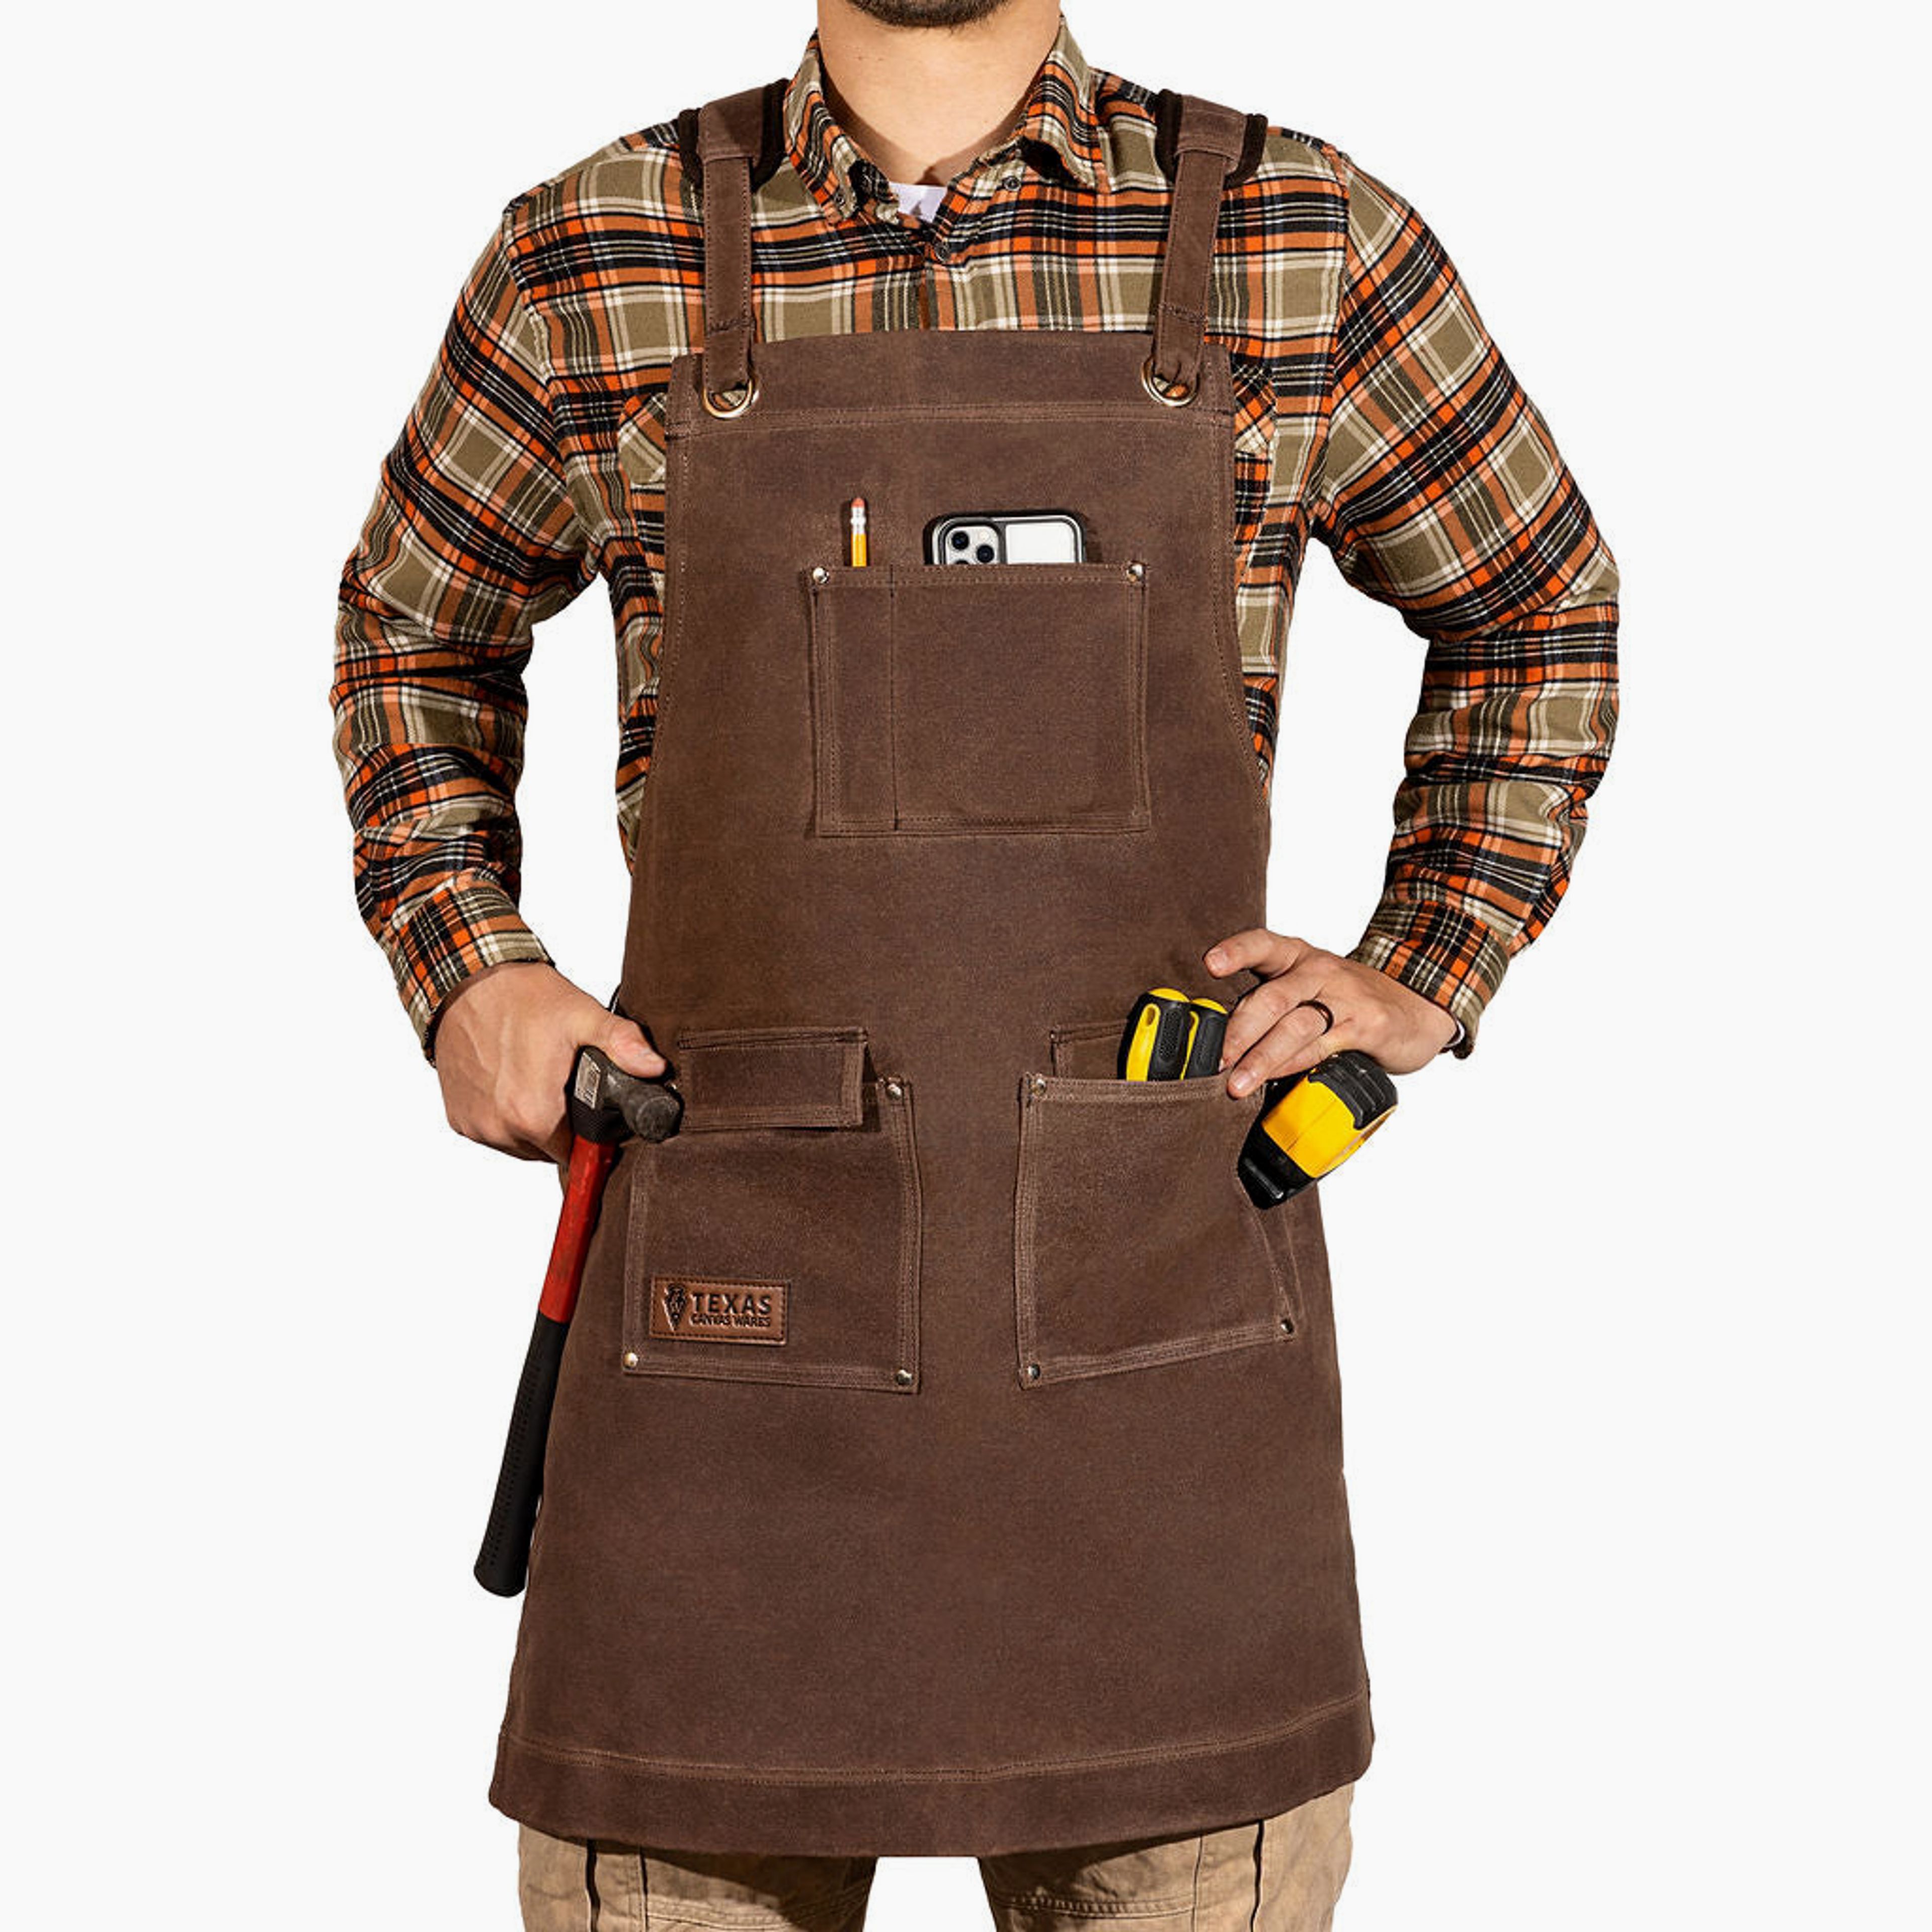 Waxed Canvas Work Apron - Handmade in the USA